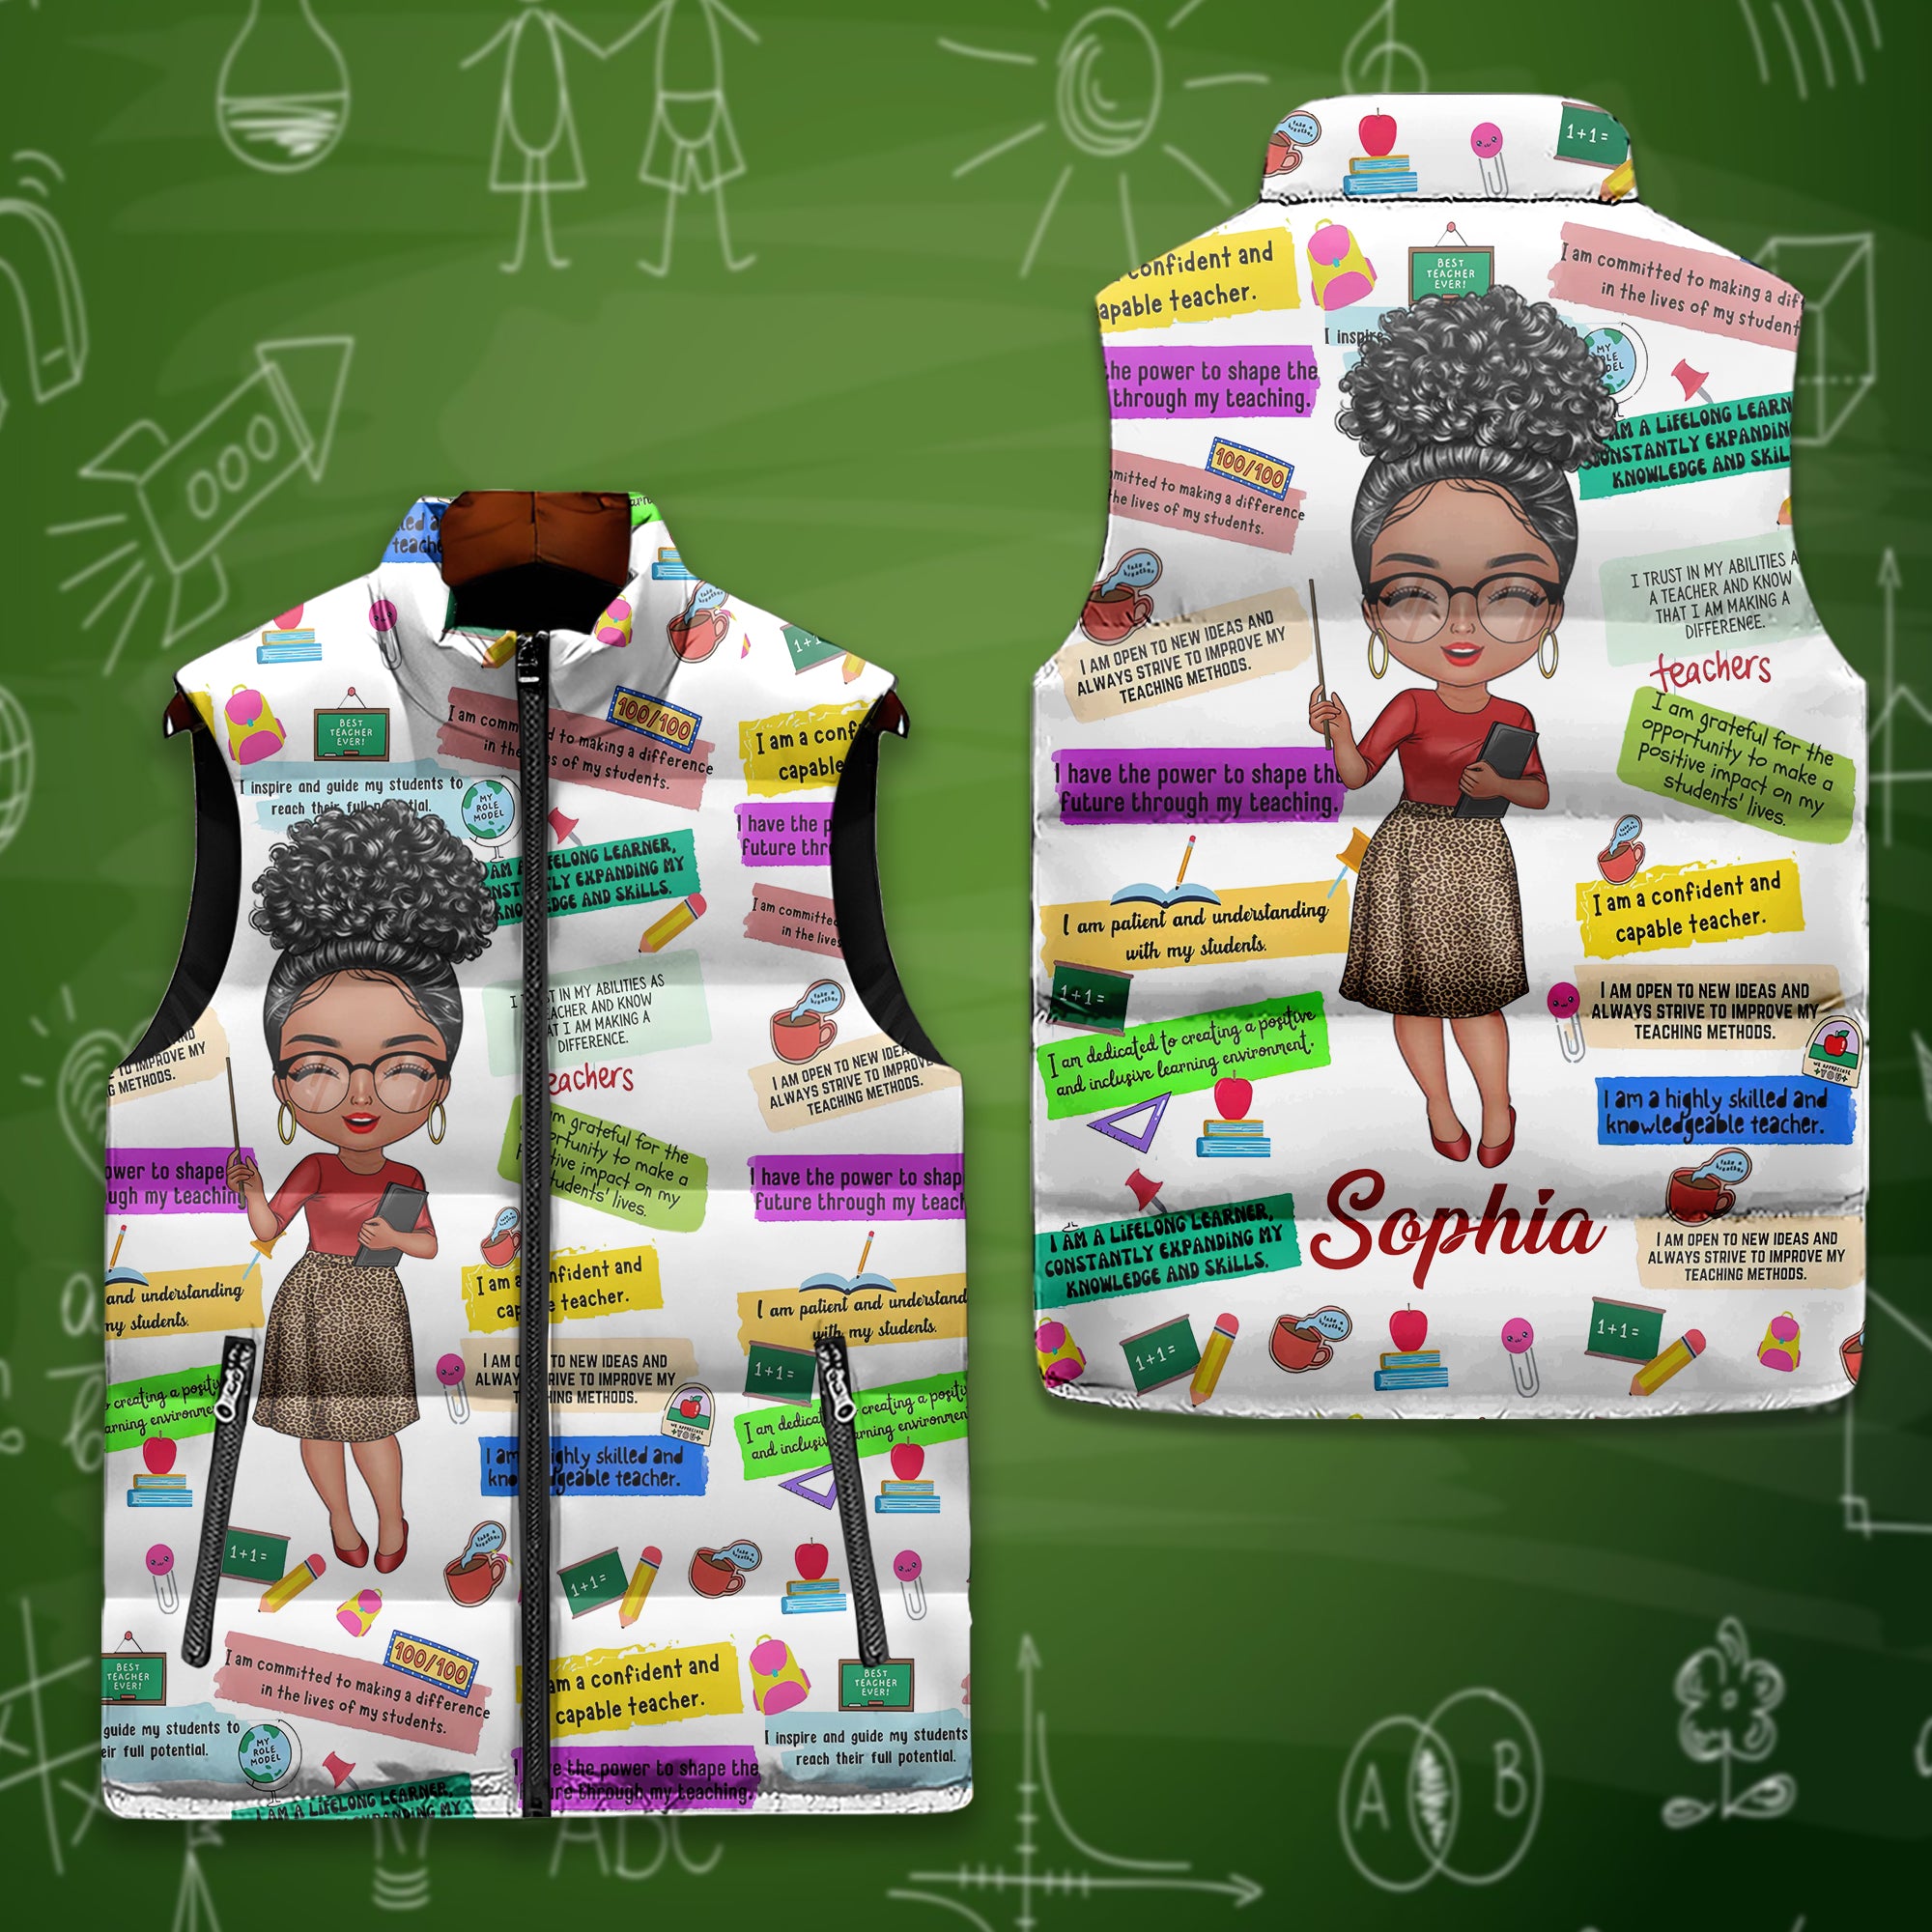 Puffer Vest -Personalized Gift Ideas For Teacher